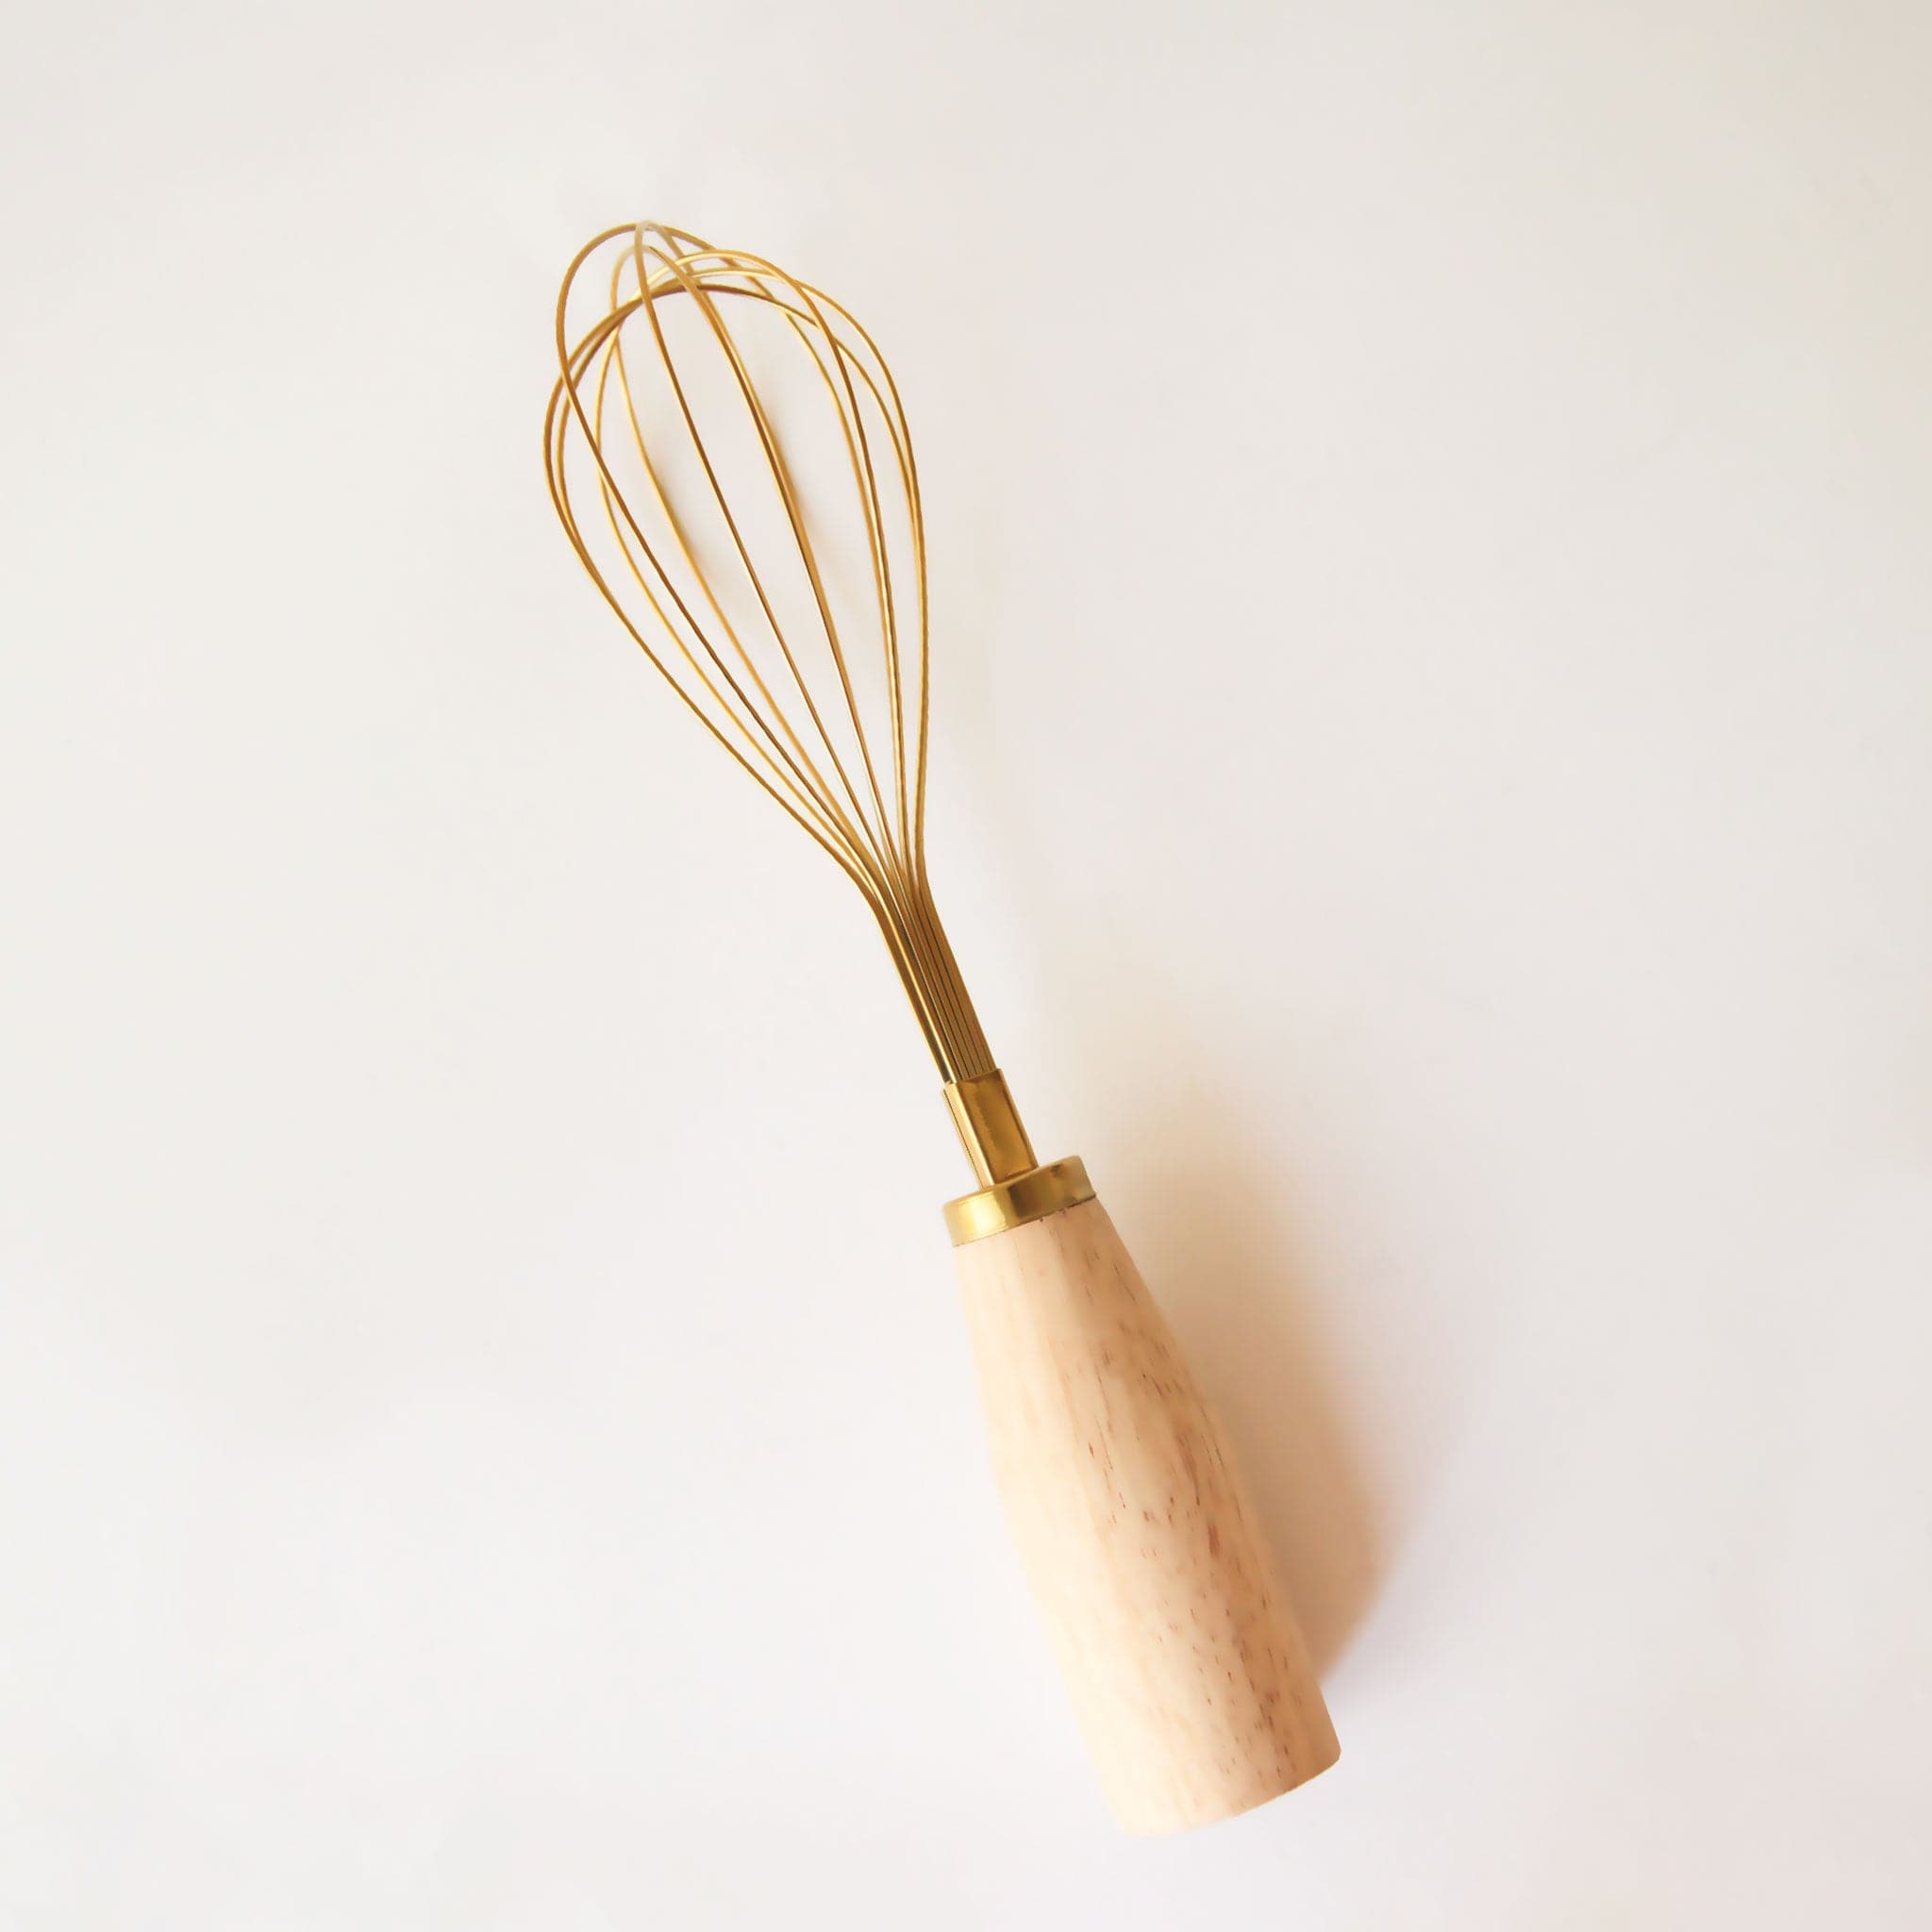 On a white background is a gold whisk with a wood handle. 